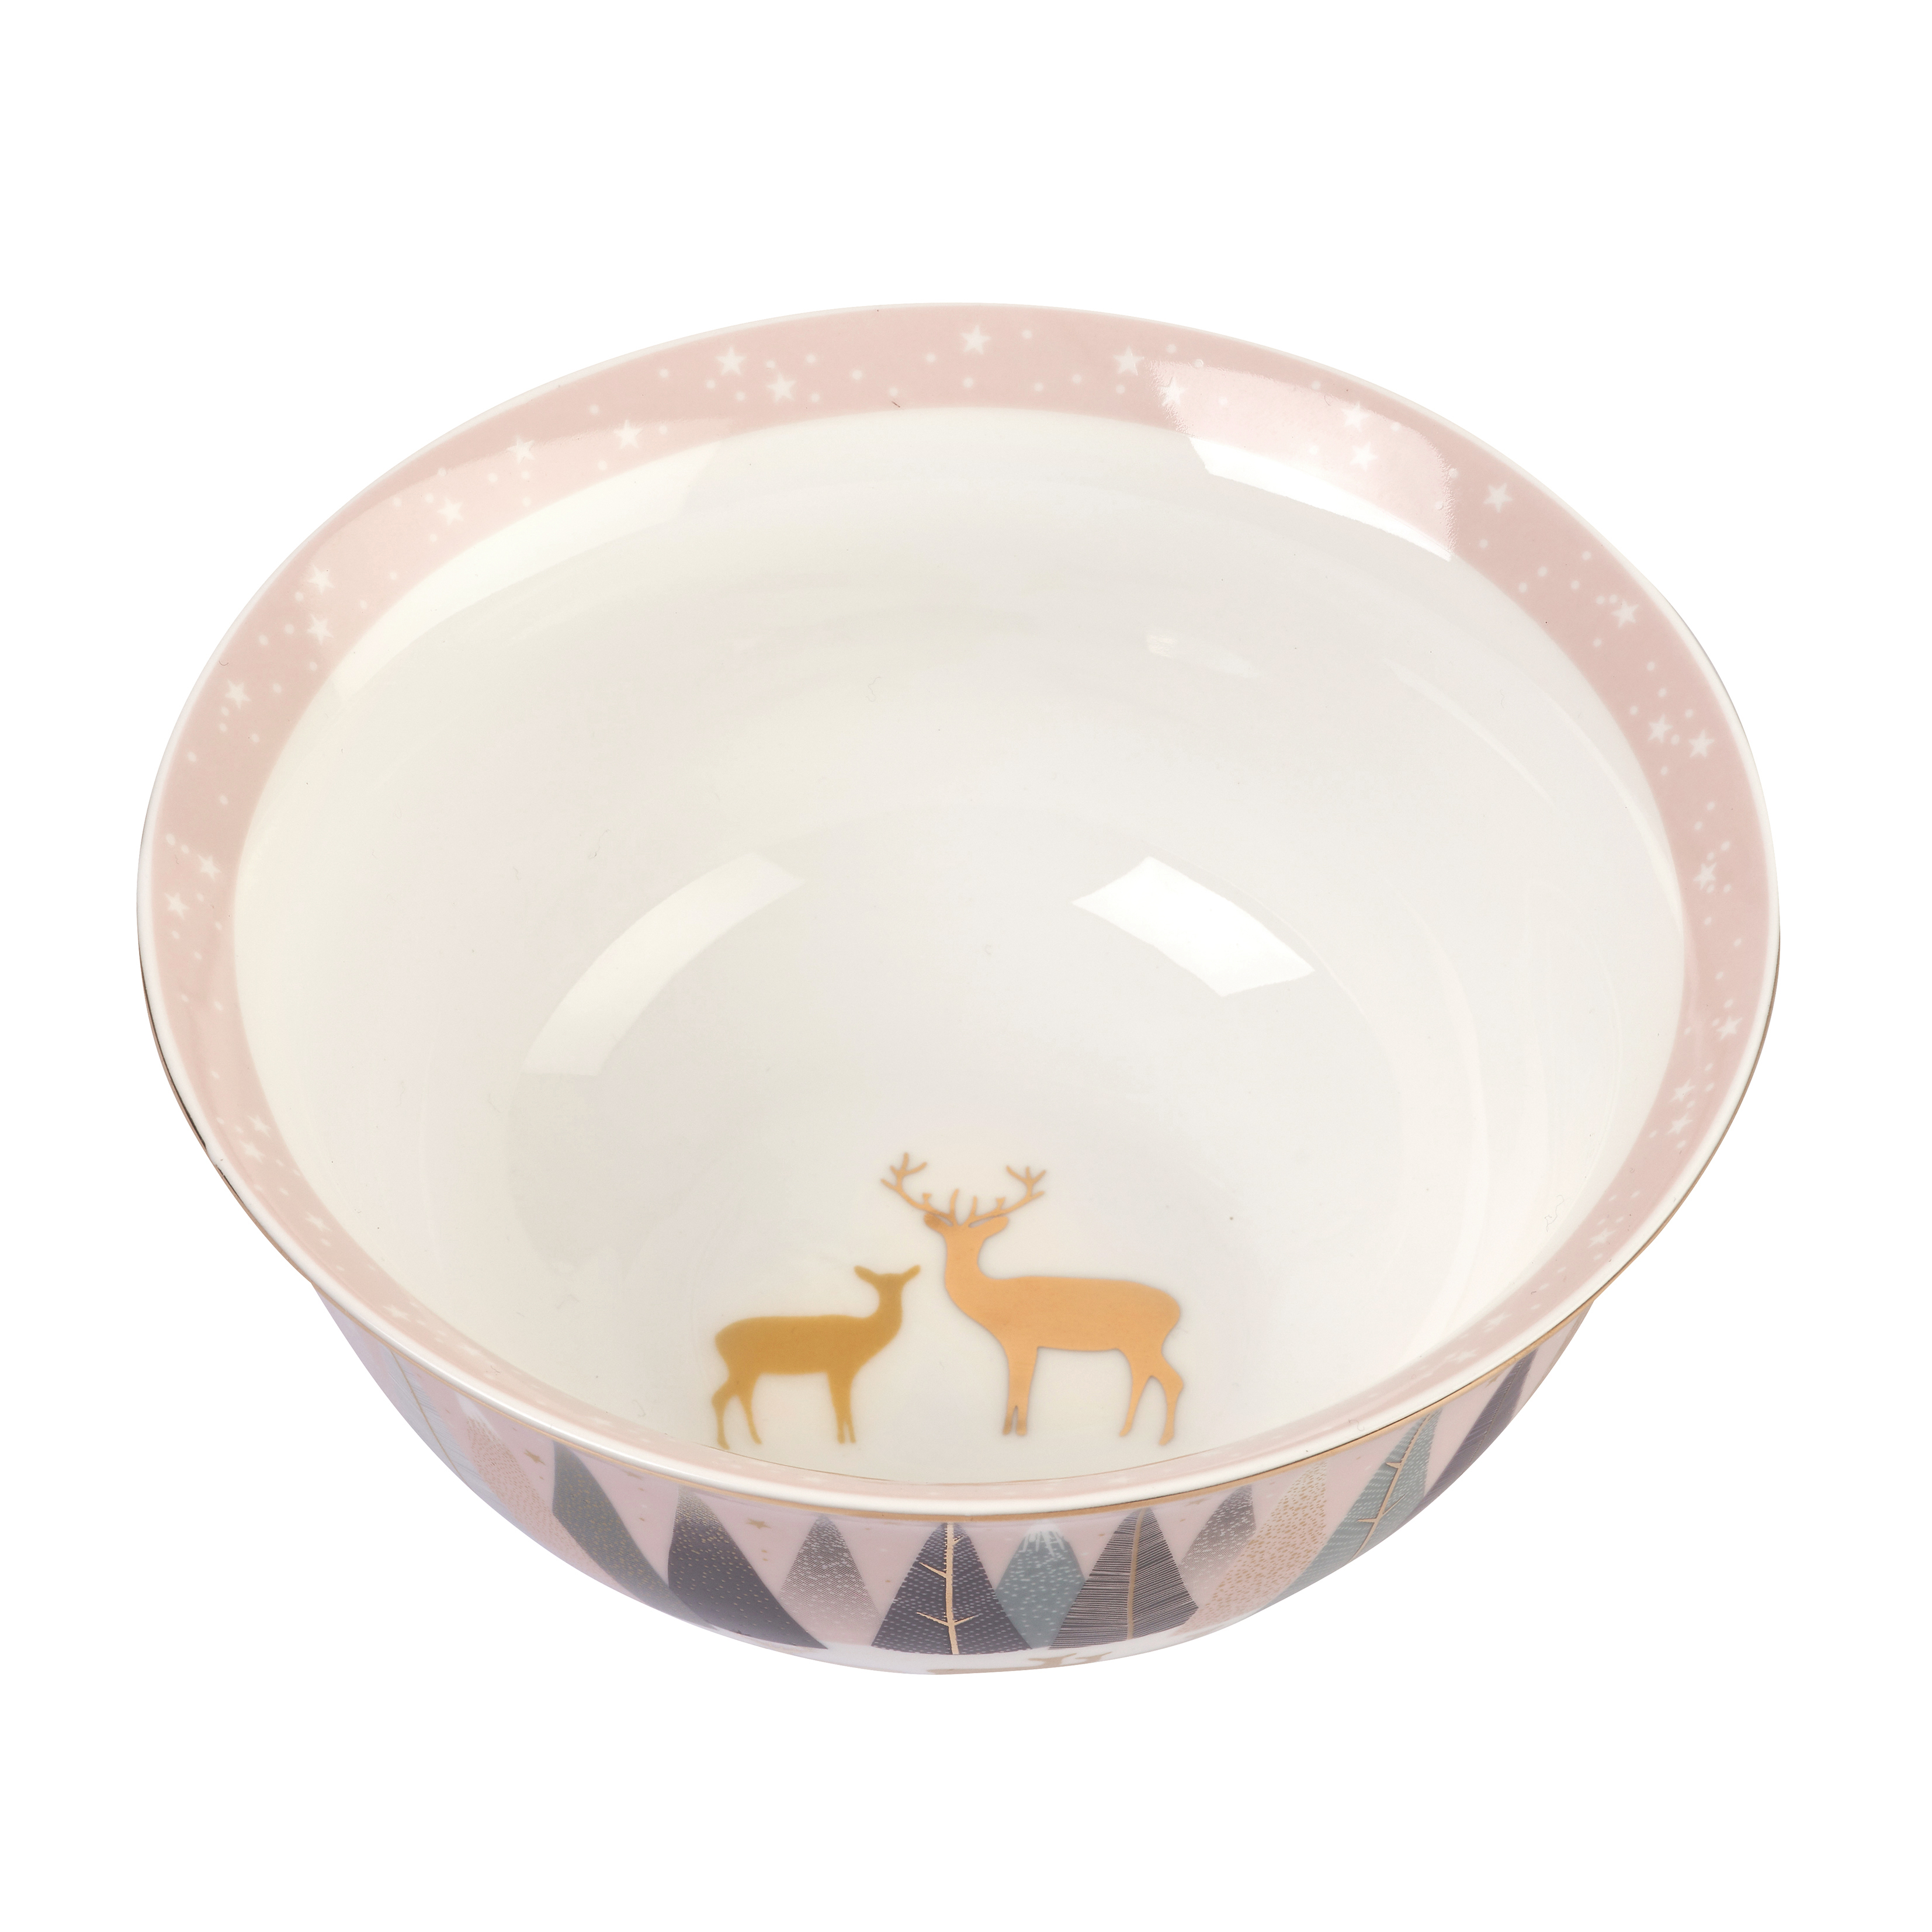 Sara Miller London for Portmeirion Frosted Pines 6 Inch Candy Bowl image number null